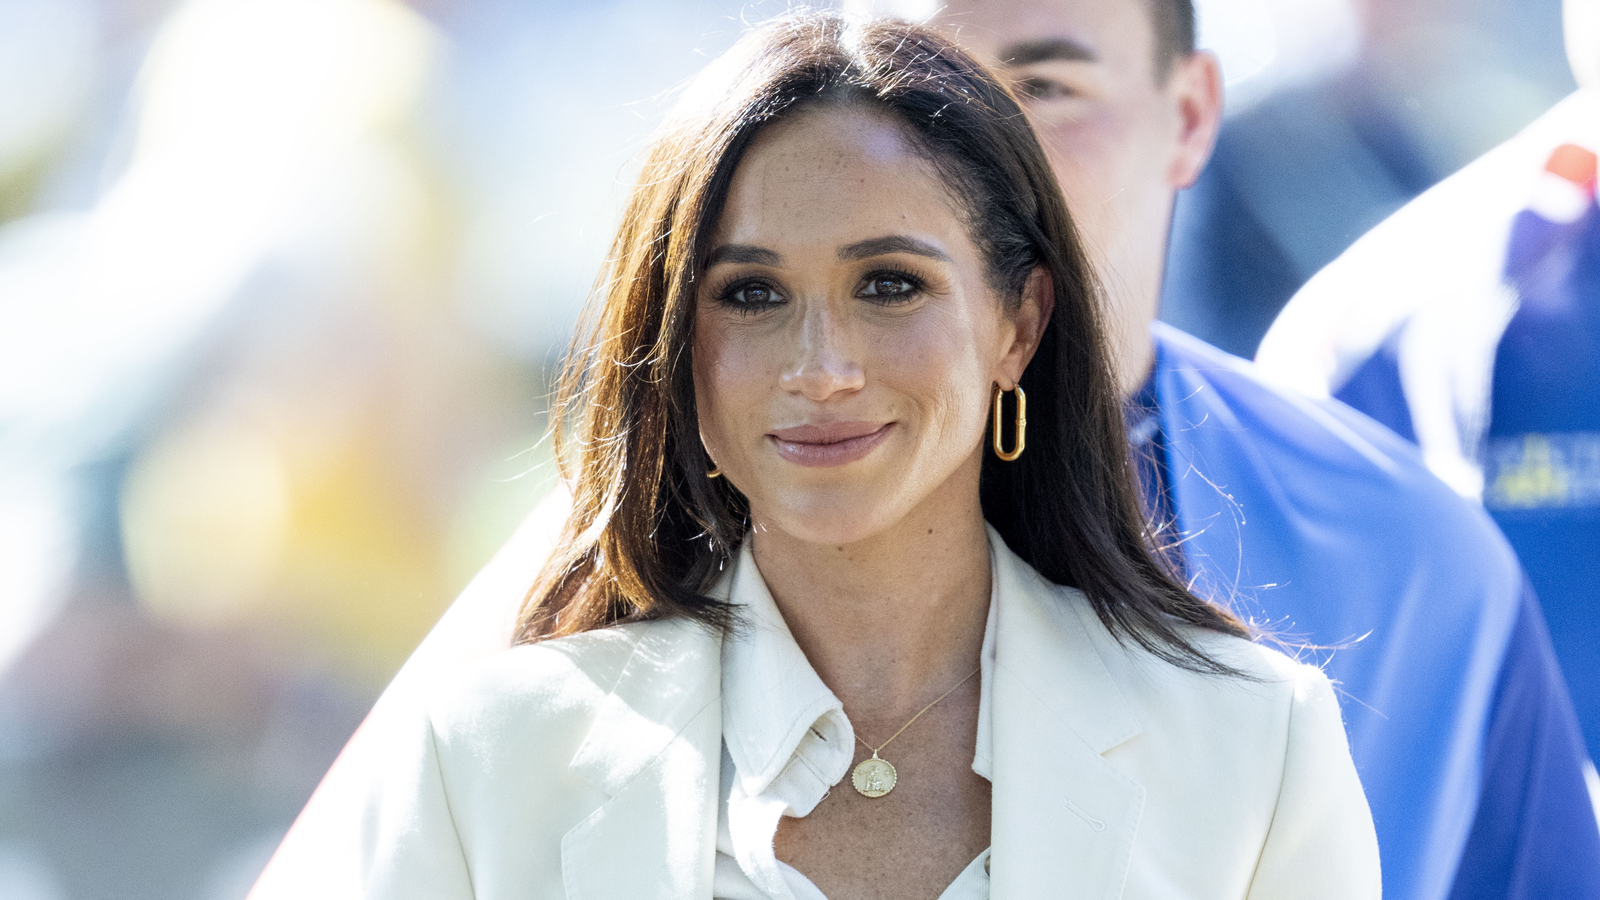 The Fashion Trick Behind Why Meghan Markle Always Wears Shoes Too Big